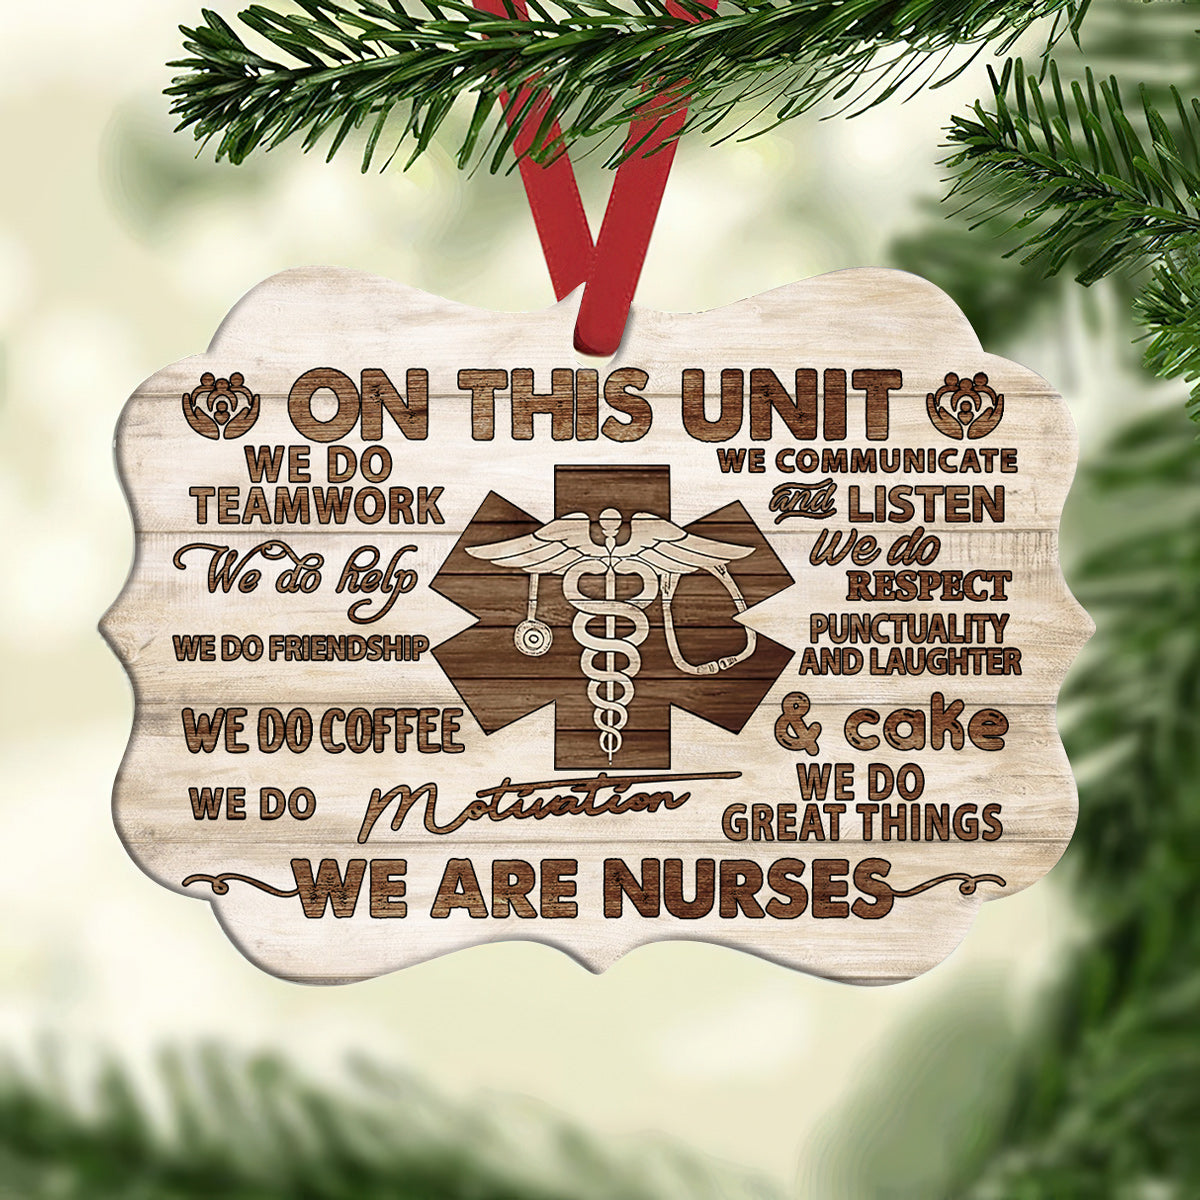 Wooden Style We Are Nurses Metal Ornament - Christmas Ornament - Christmas Gift